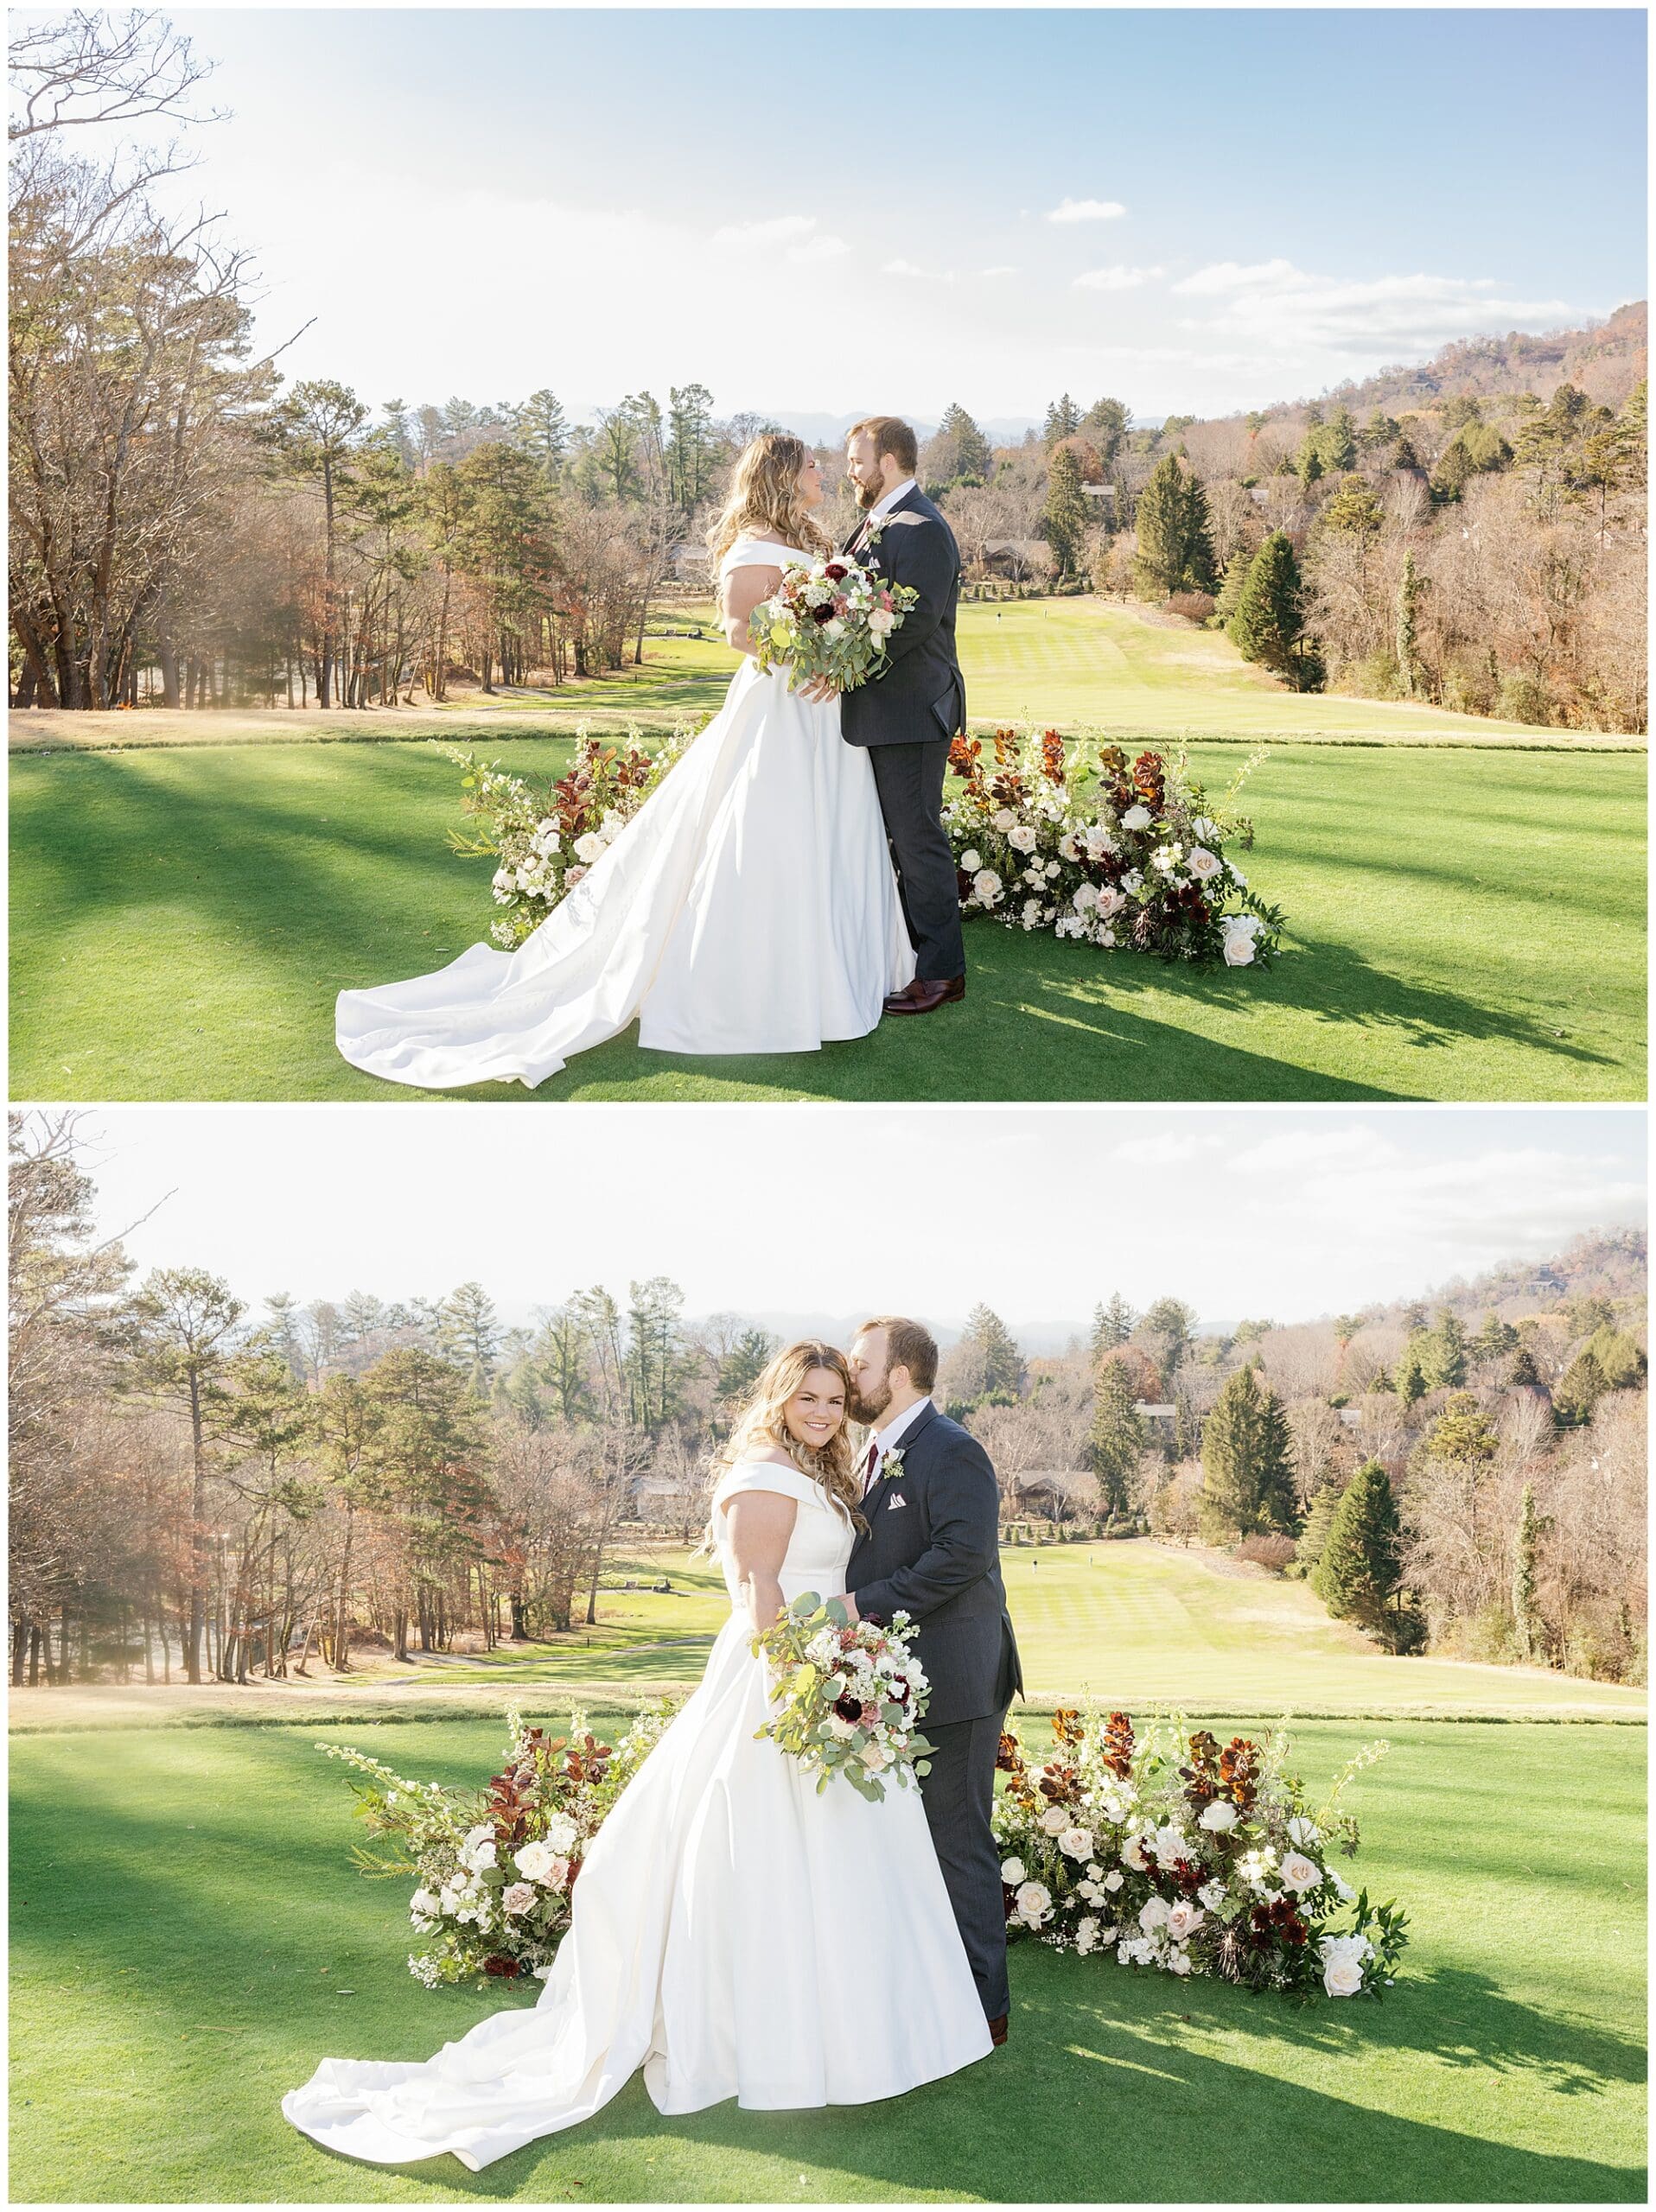 A bride and groom kissing on a golf course.